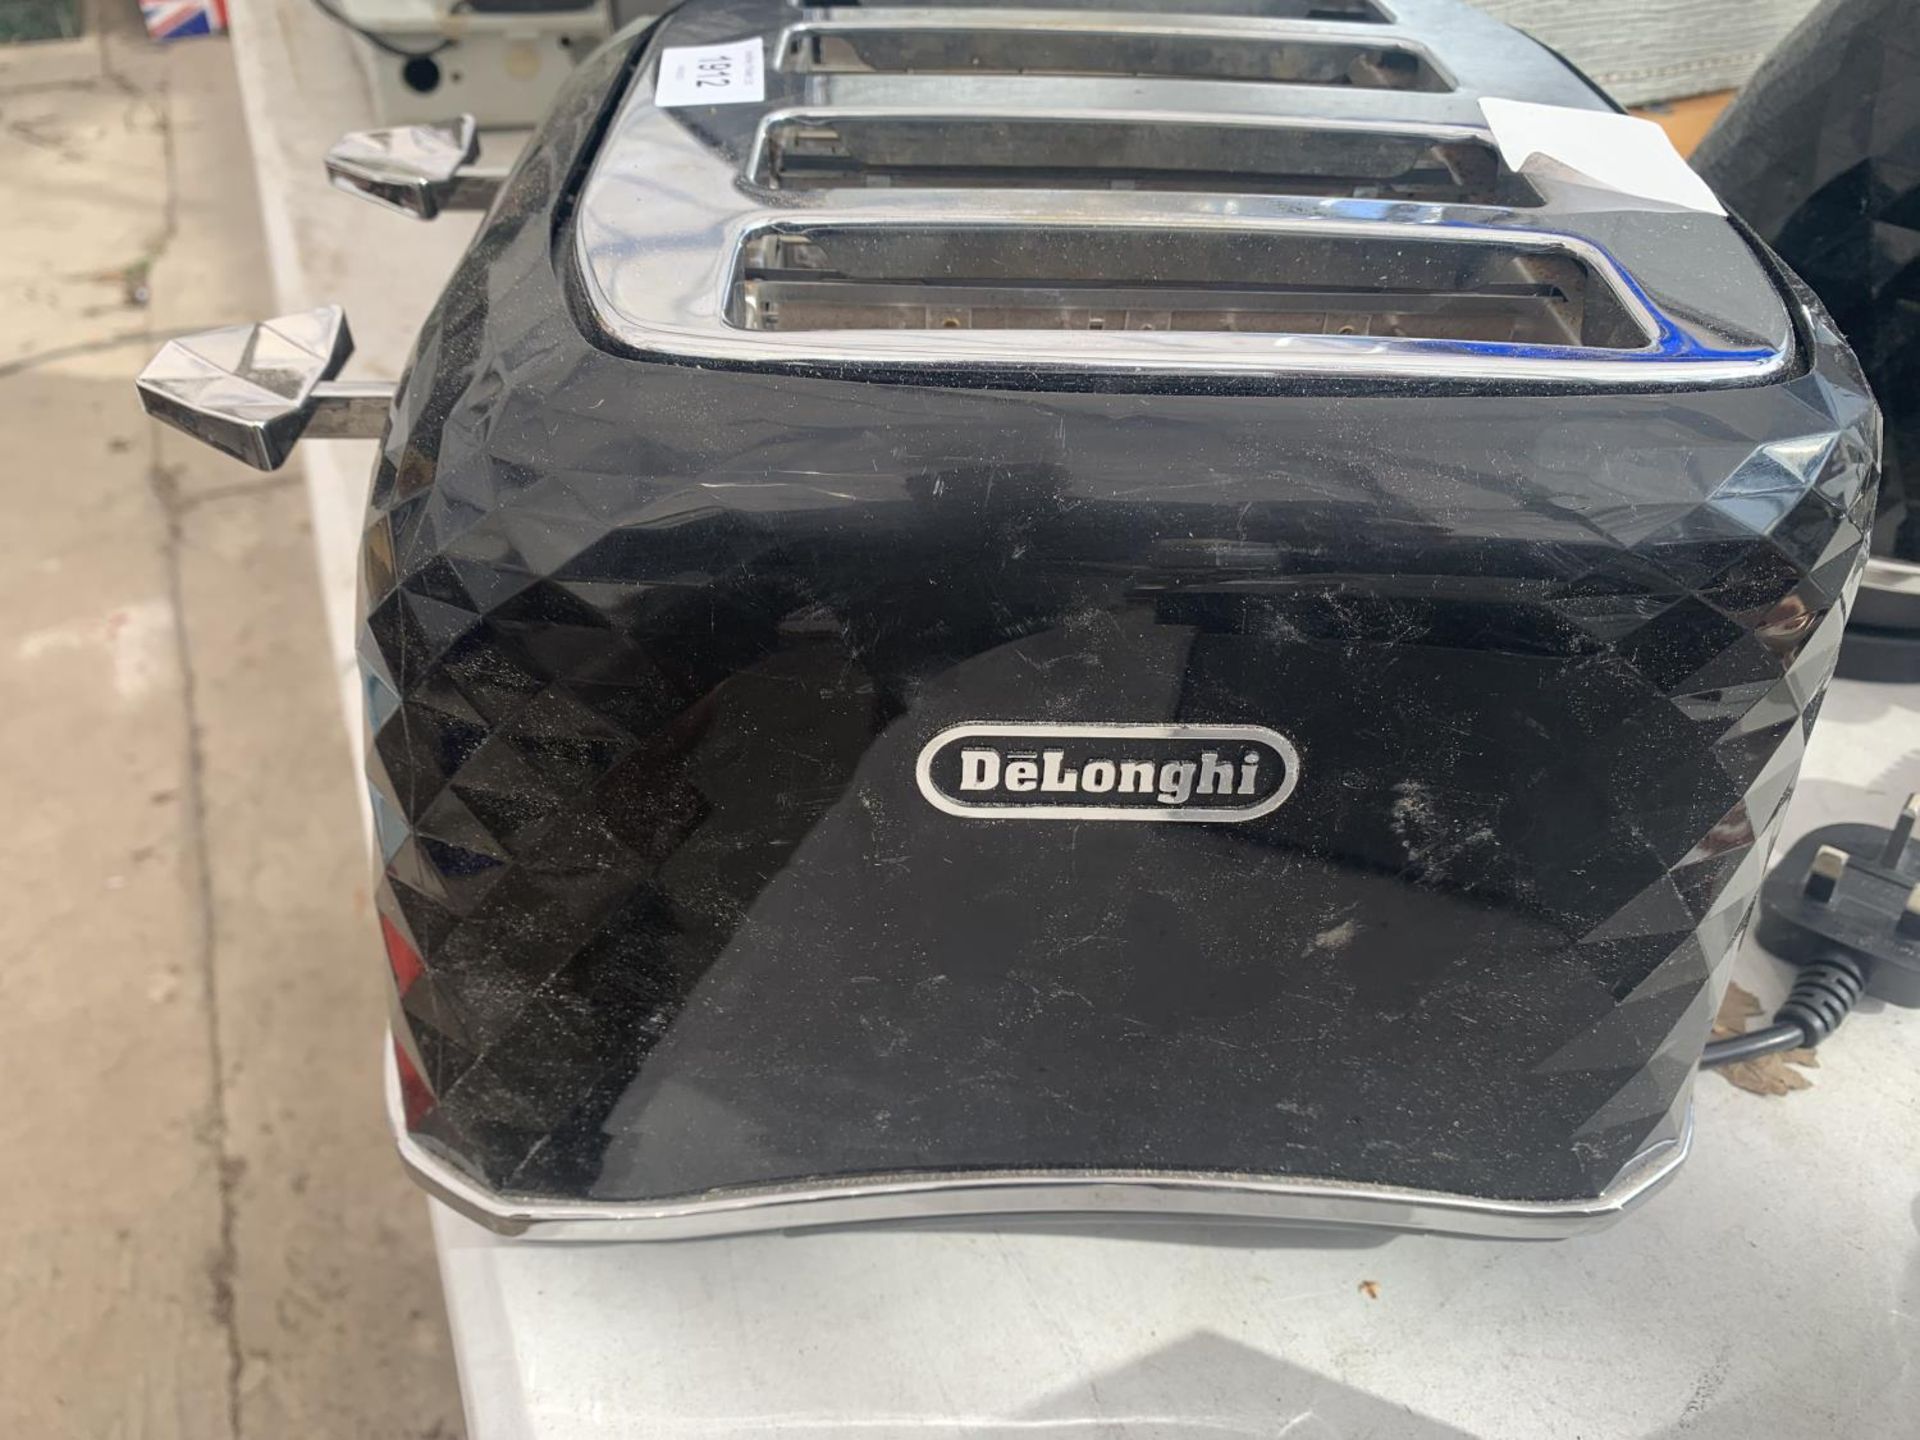 A DELONGHI TOASTER AND KETTLE - Image 2 of 5